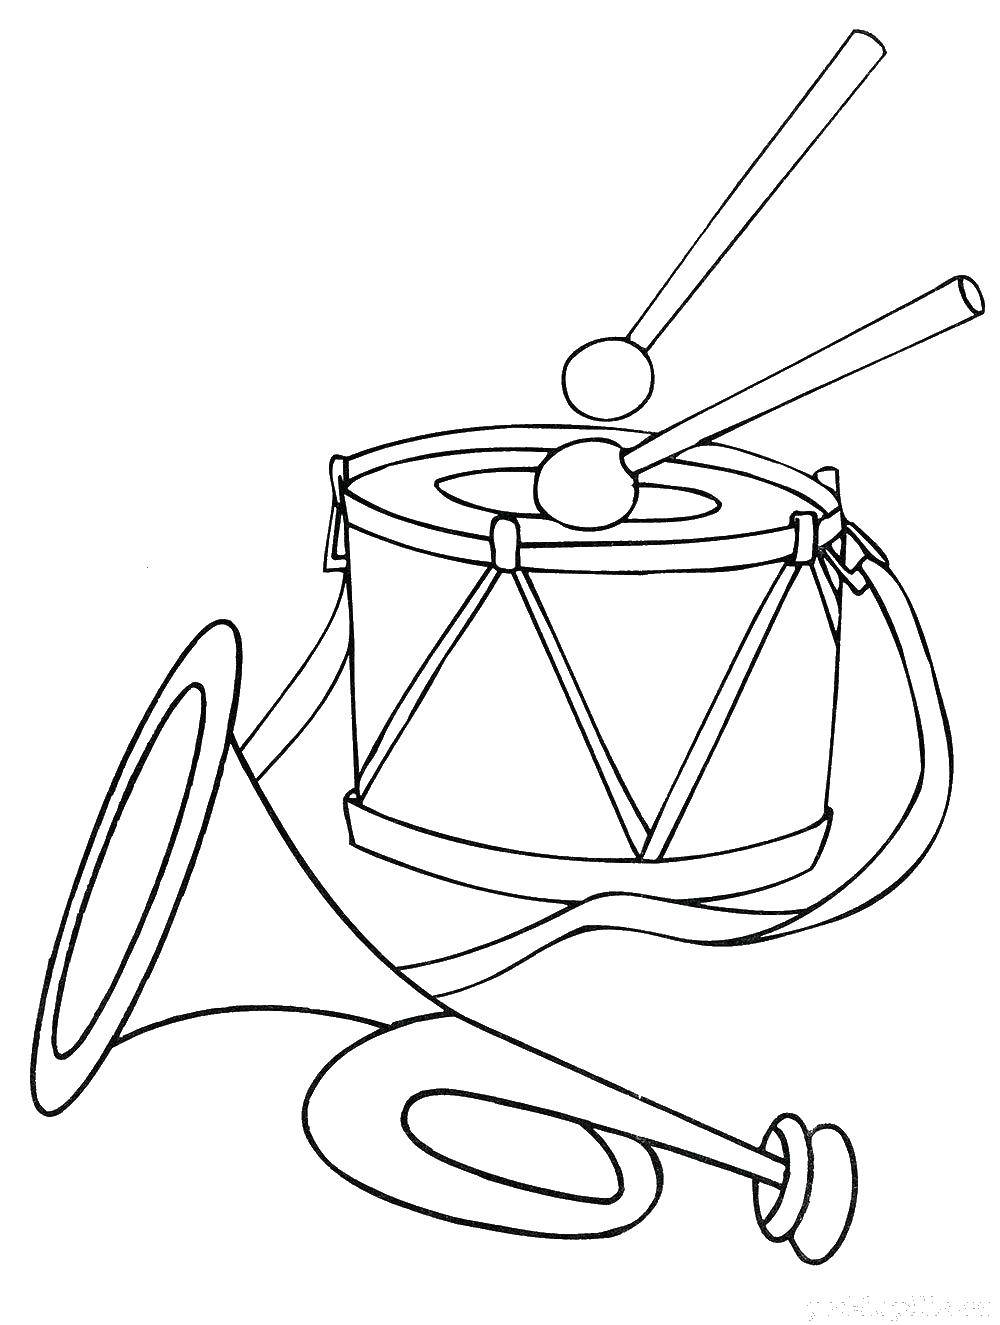 Coloring Musical instruments. Category musical instruments . Tags:  musical instruments .